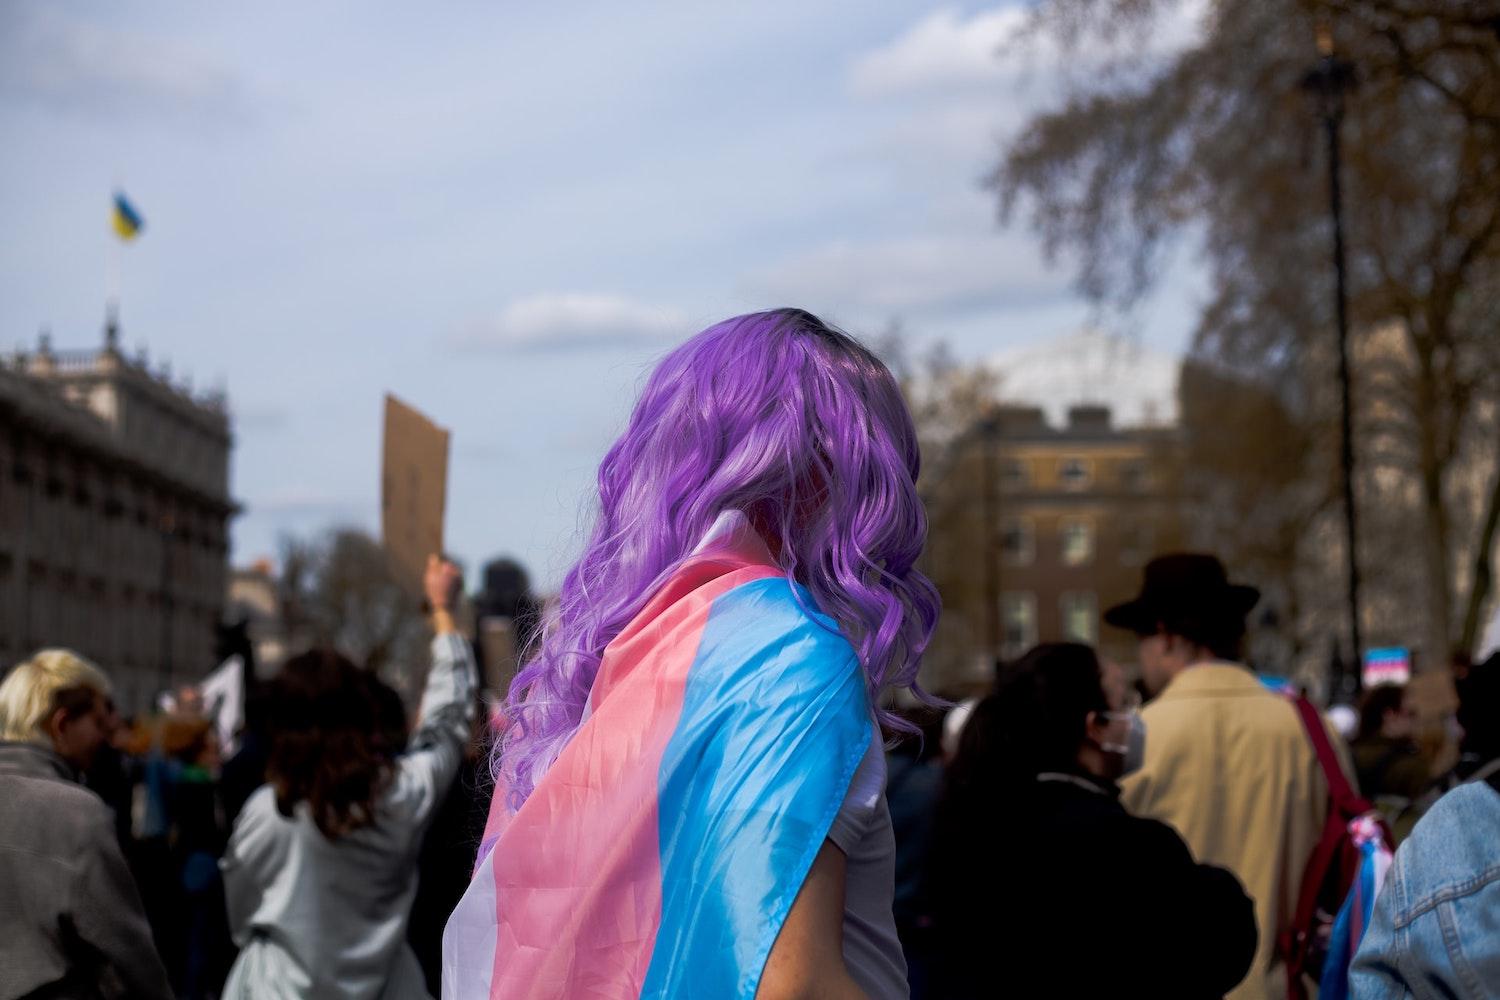 Woman with purple hair at protest wearing transgender flag 